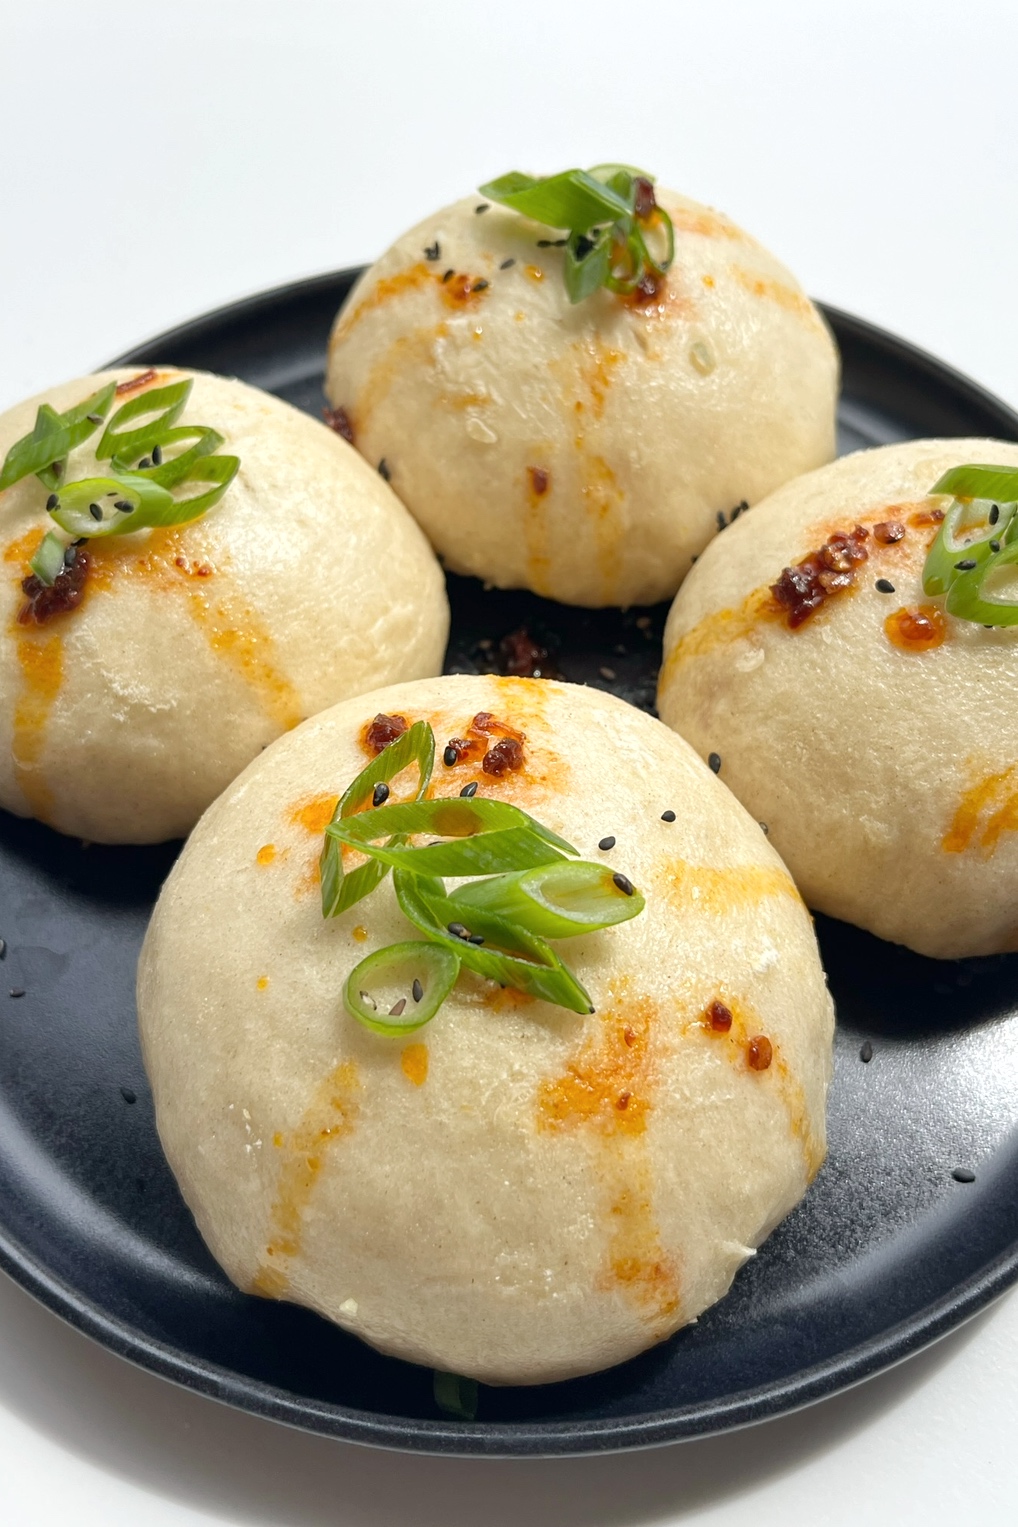 coconut bao (steamed buns) topped with spring onion and chilli oil.